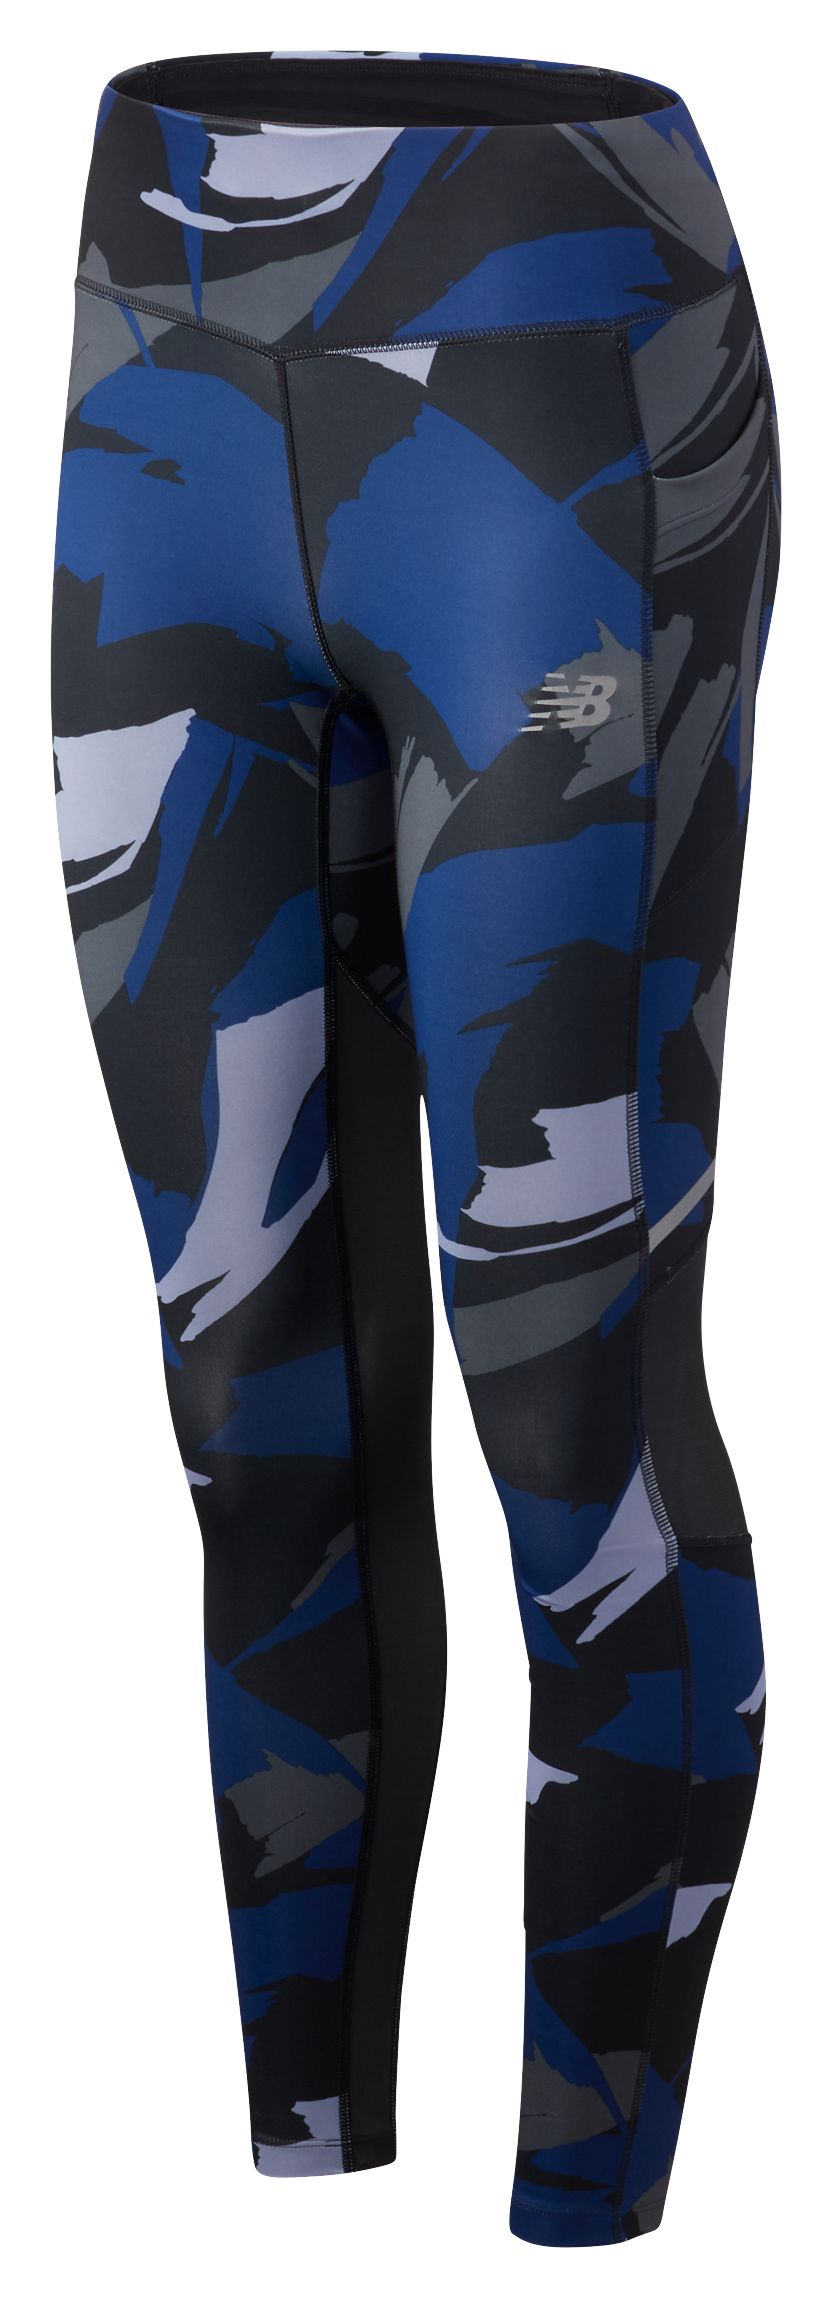 NB Printed Impact Tight, WP83229BLP, Techtonic Blue with Black & Outerspace